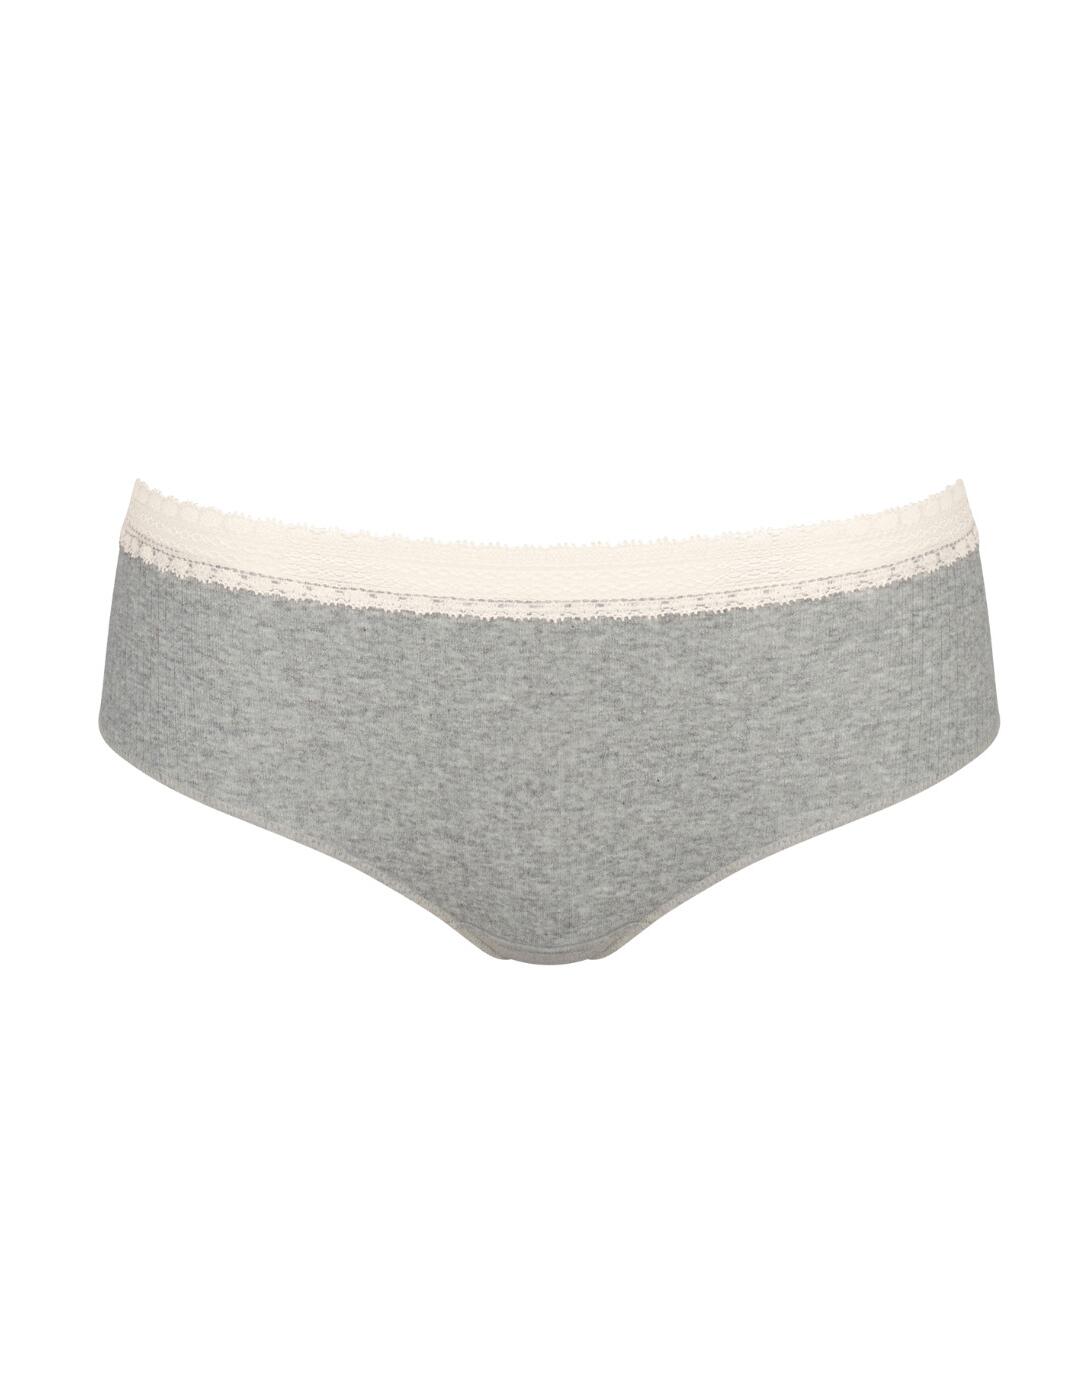 Sloggi Hipster Brief Knickers GO Ribbed 2 Pack Mid Rise Briefs